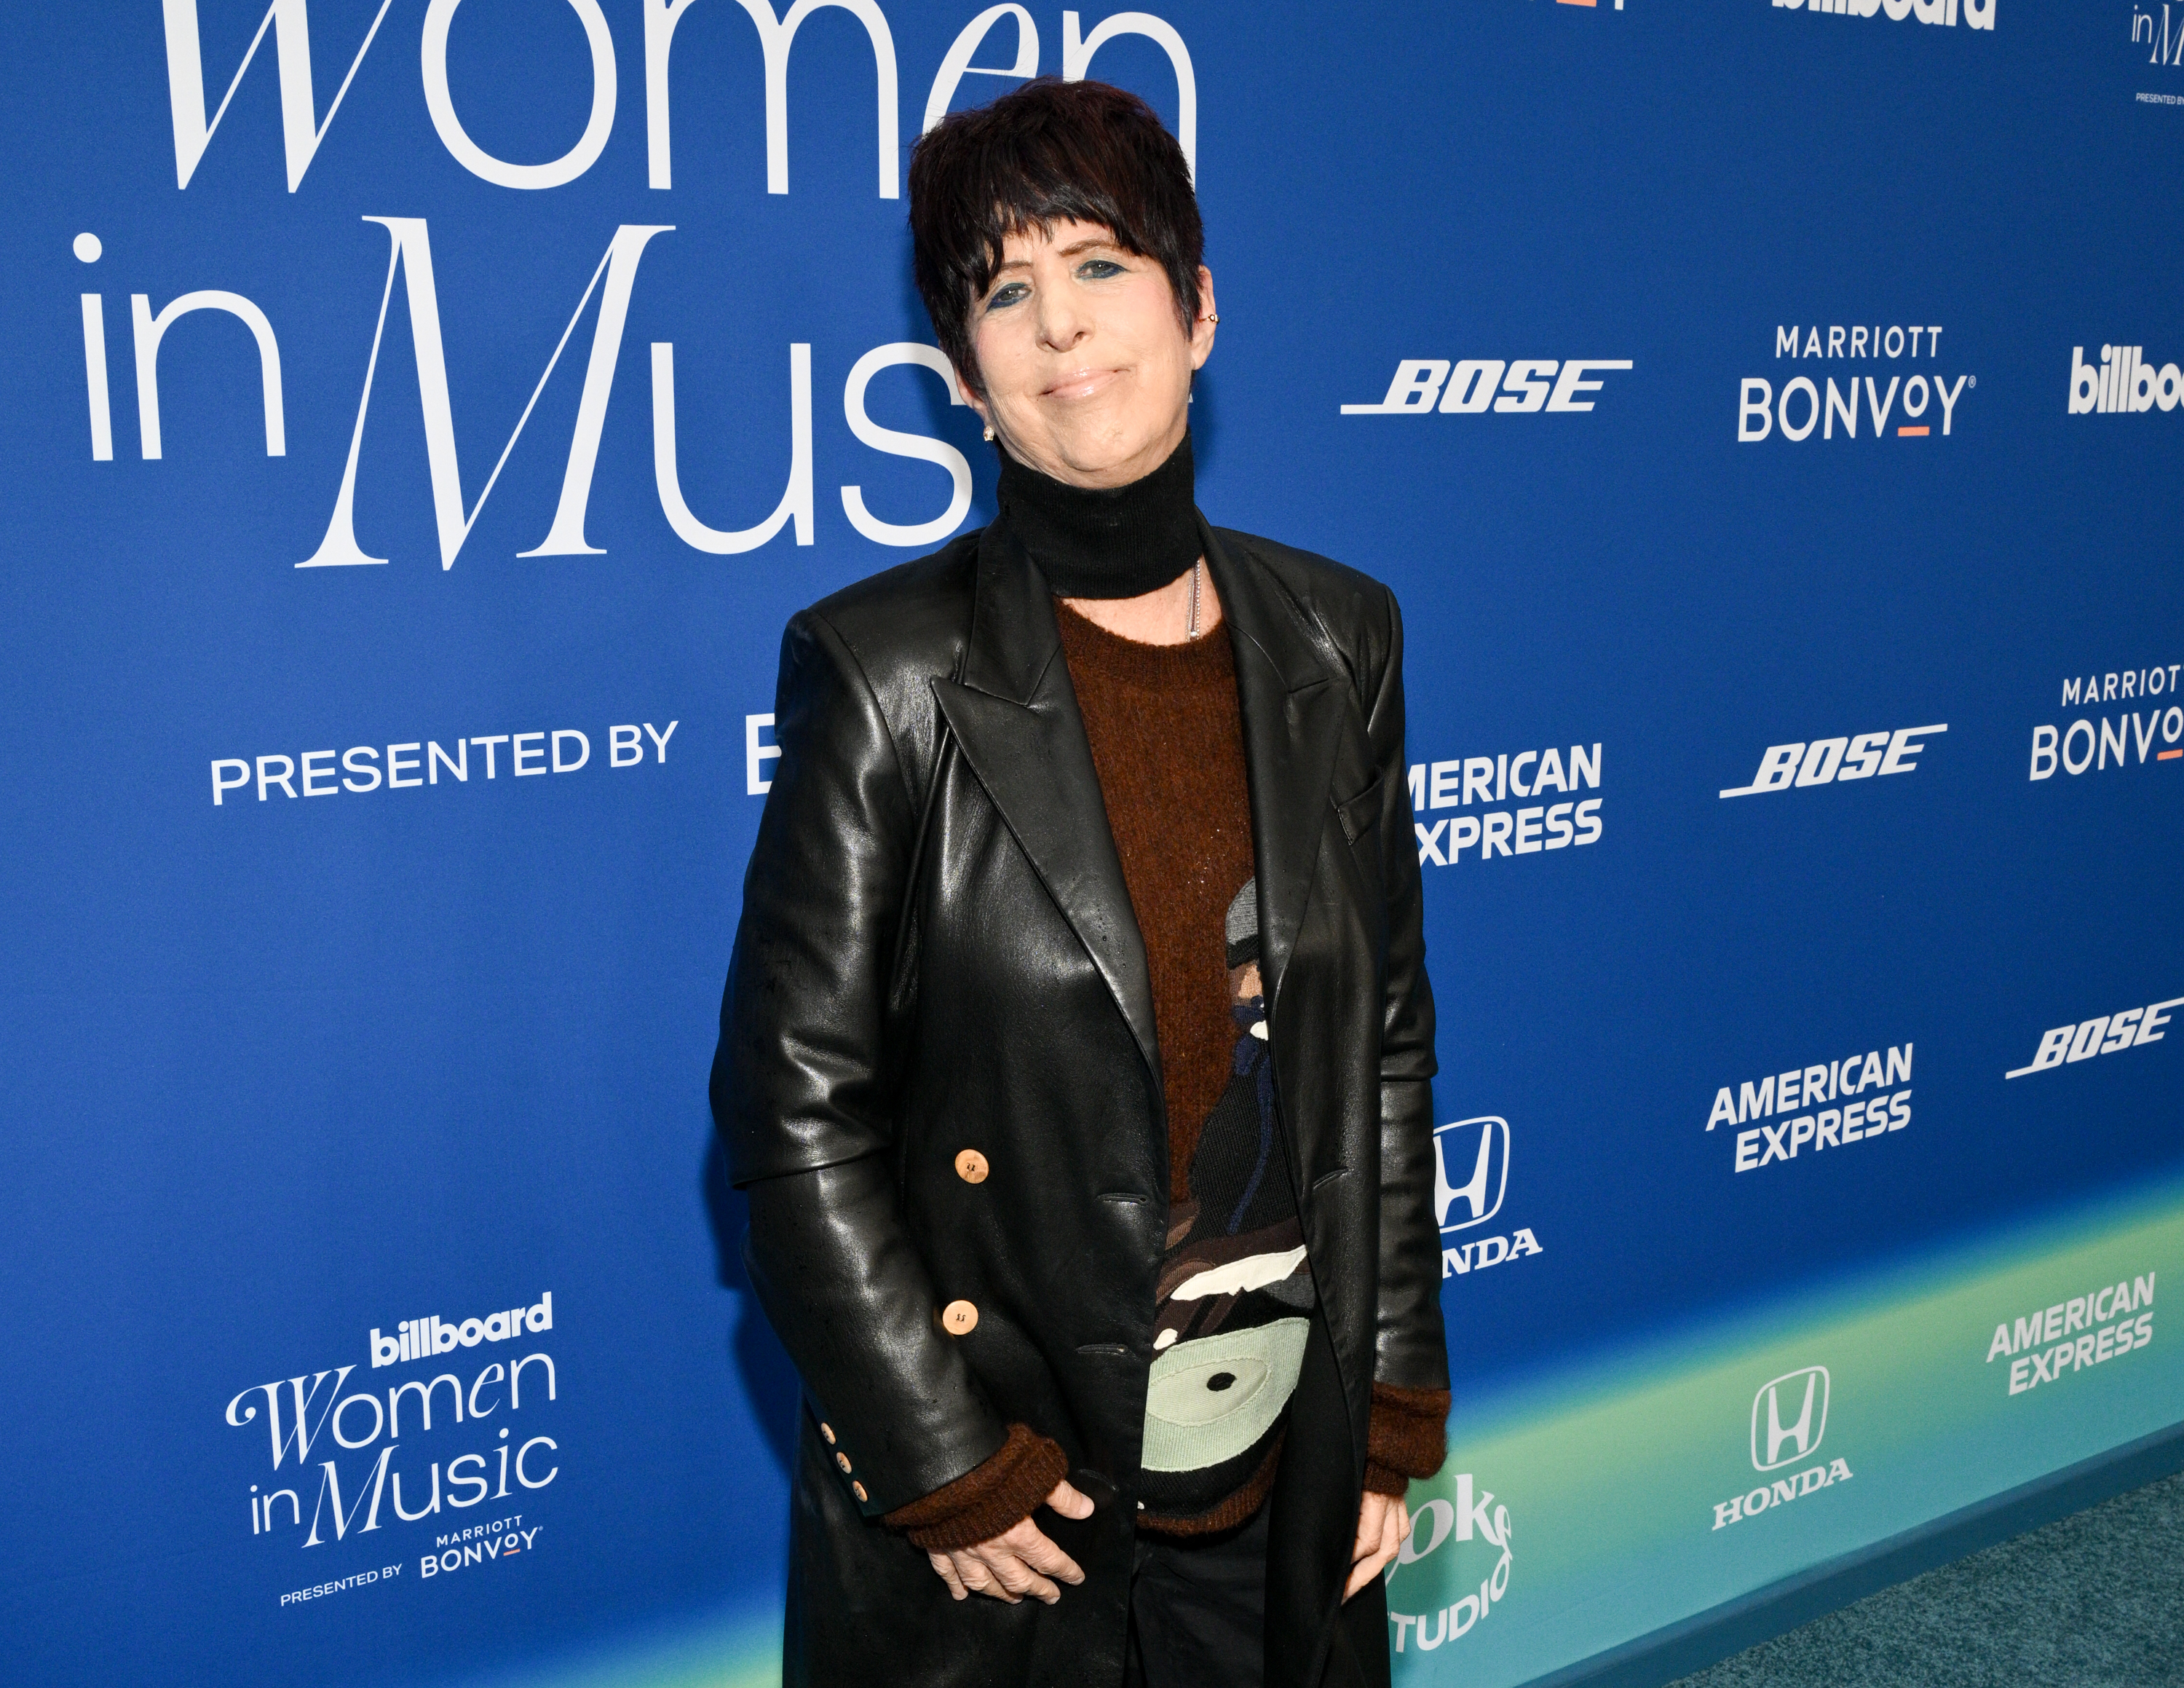 Diane Warren at an event wearing a long black coat over a brown top, with a unique white belt accessory